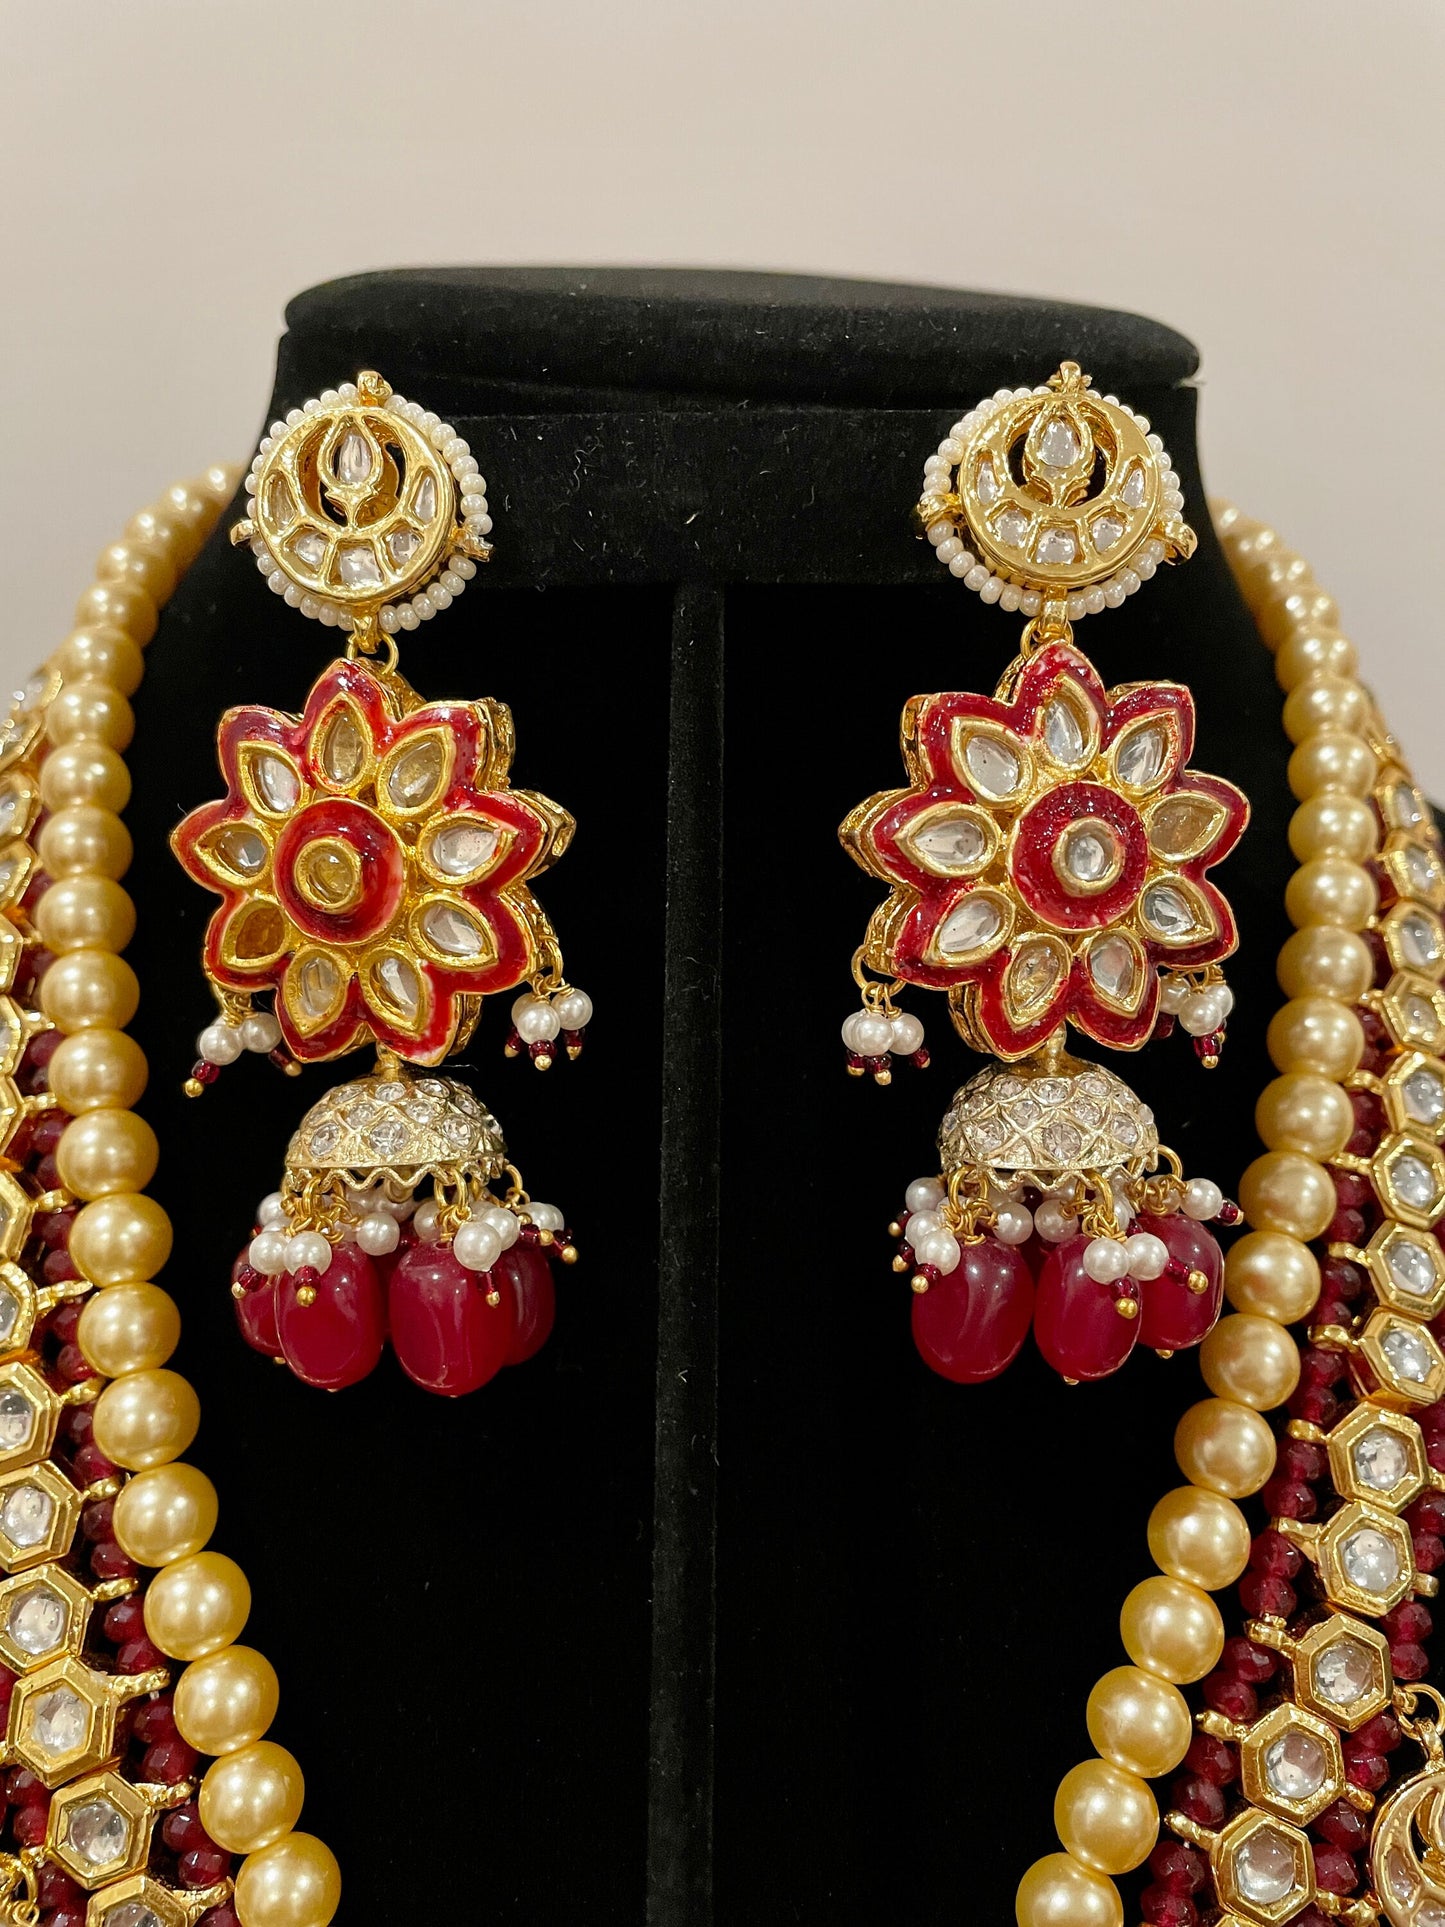 Jaipur Royalty Necklace